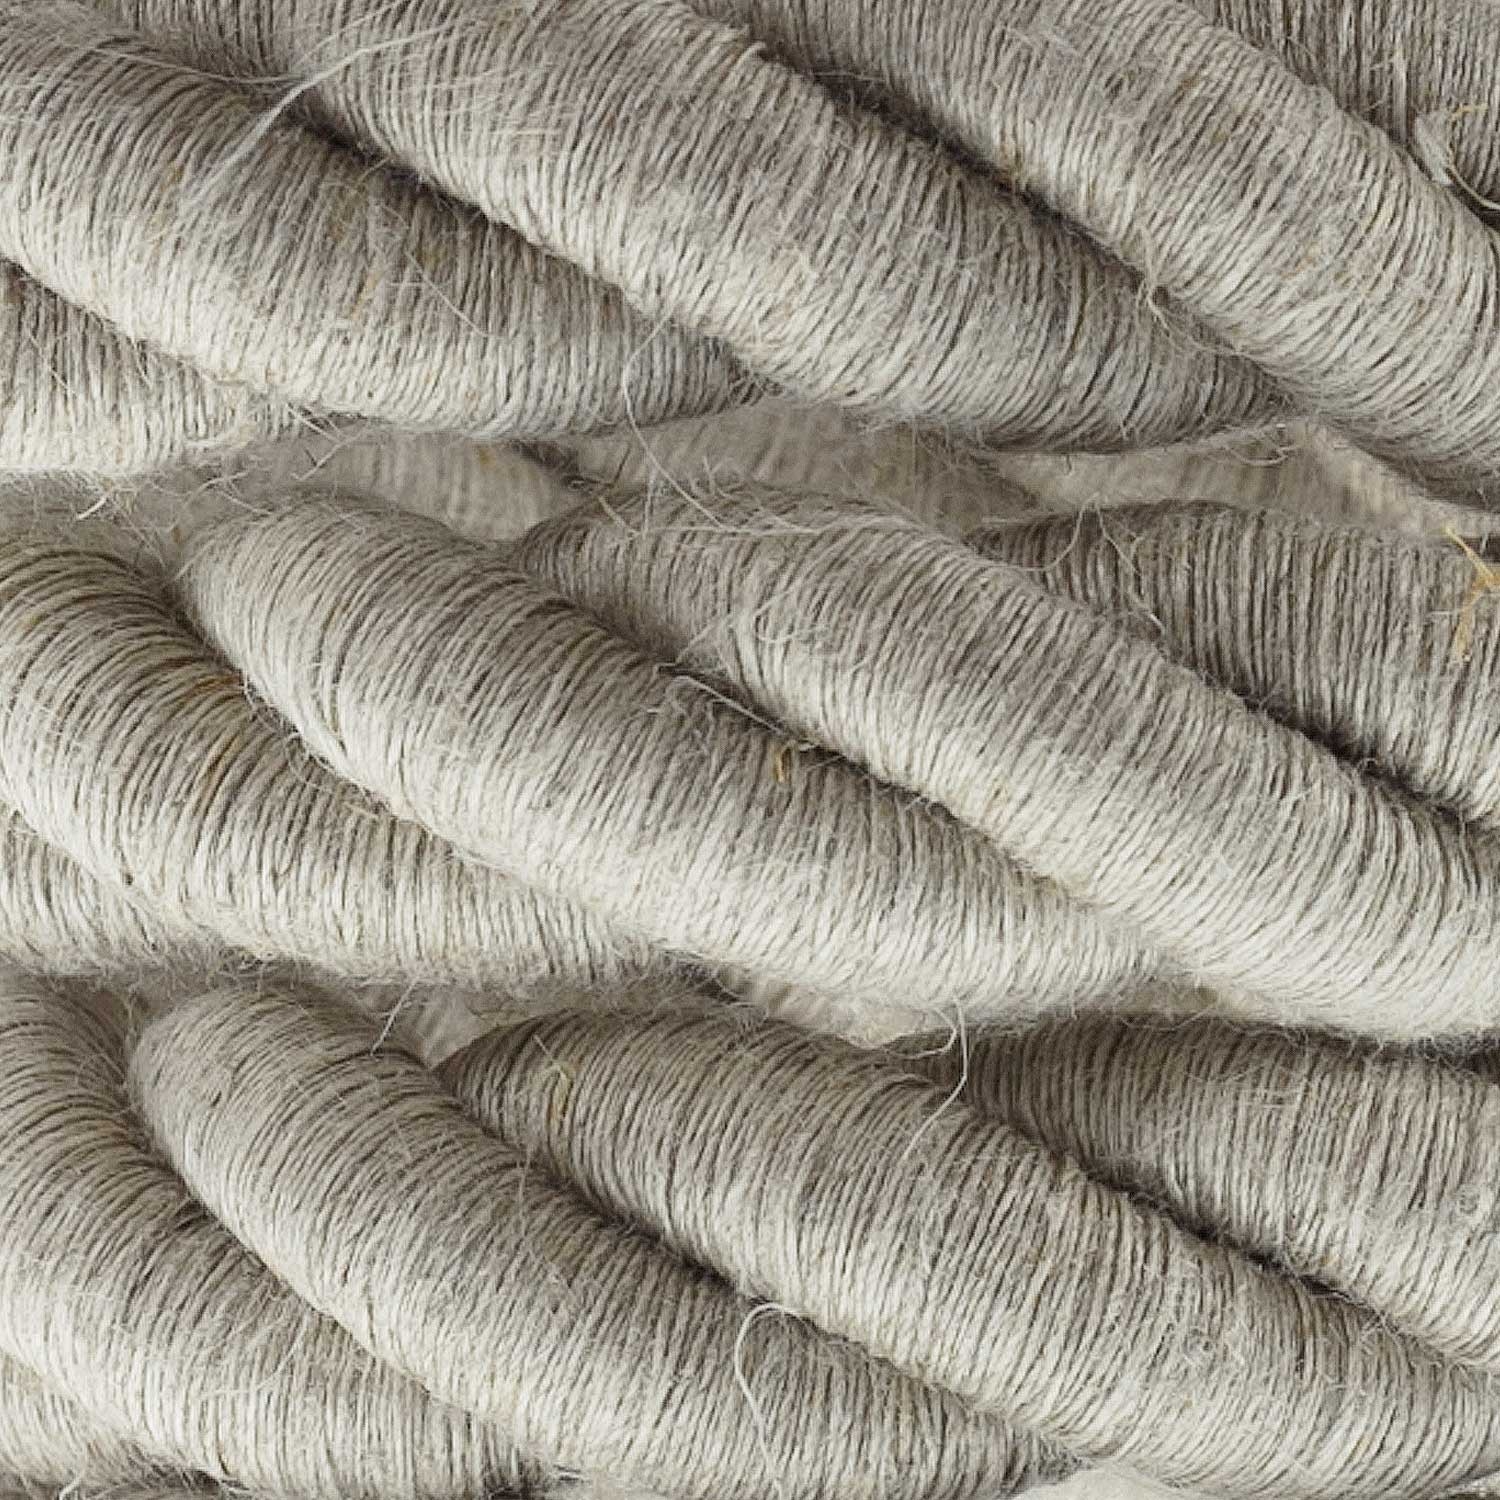 2XL Rope electrical wire 18/3 AWG wire inside. Natural Linen Fabric. 24mm.